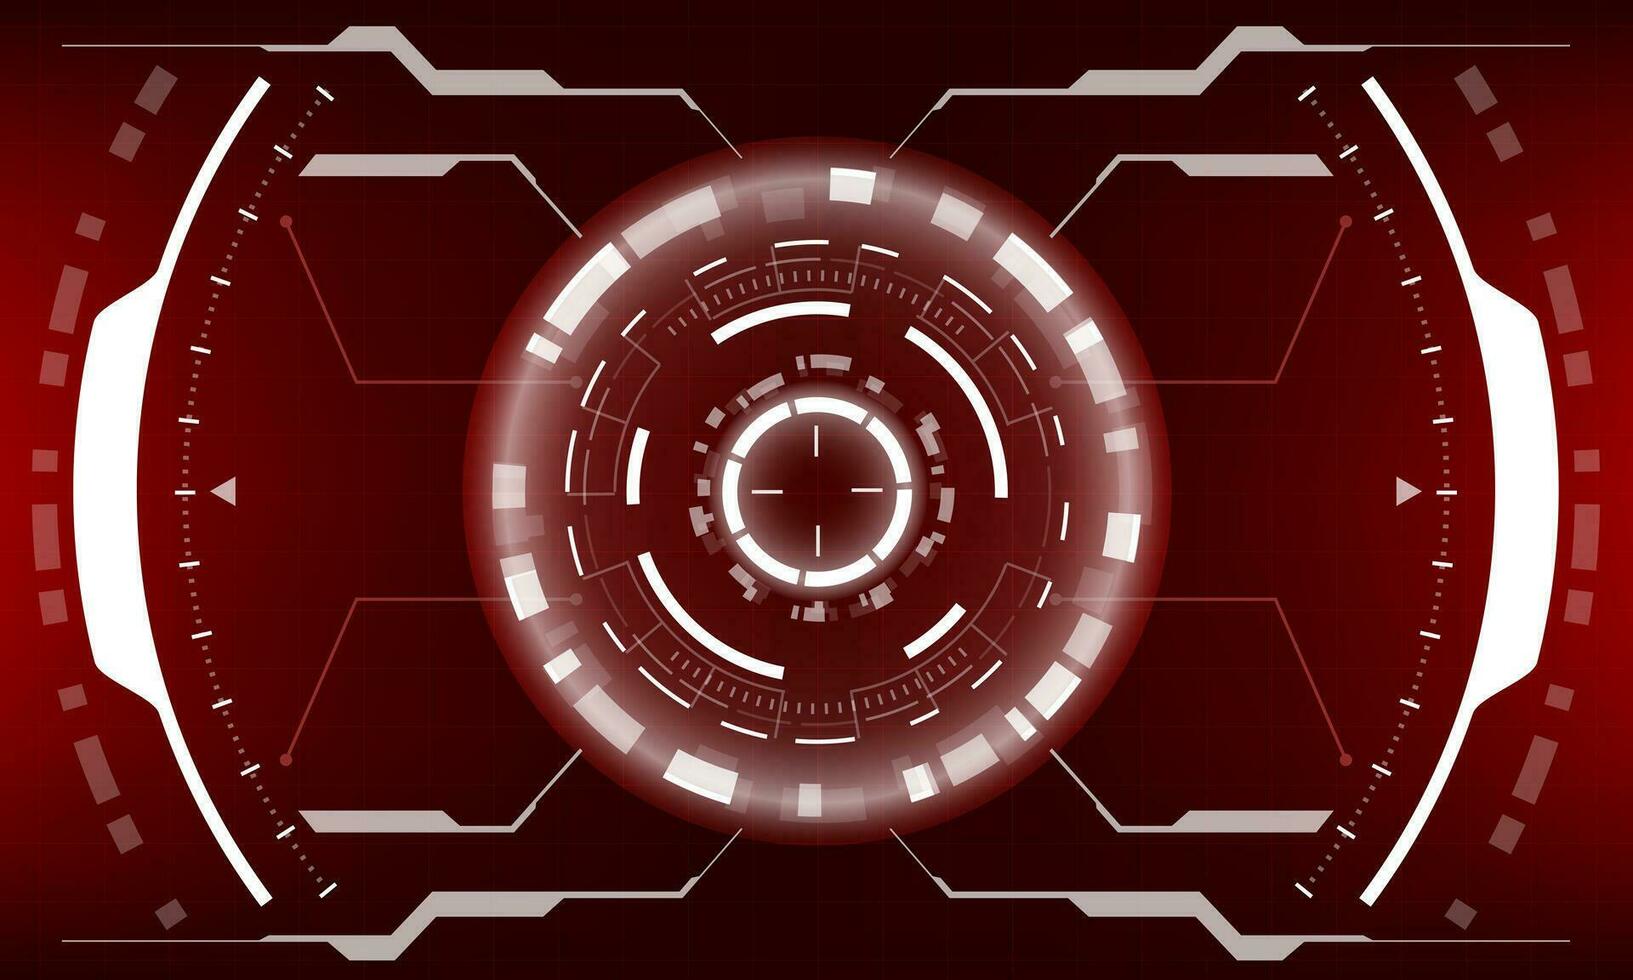 HUD sci-fi interface screen view white geometric on red design virtual reality futuristic technology creative display vector